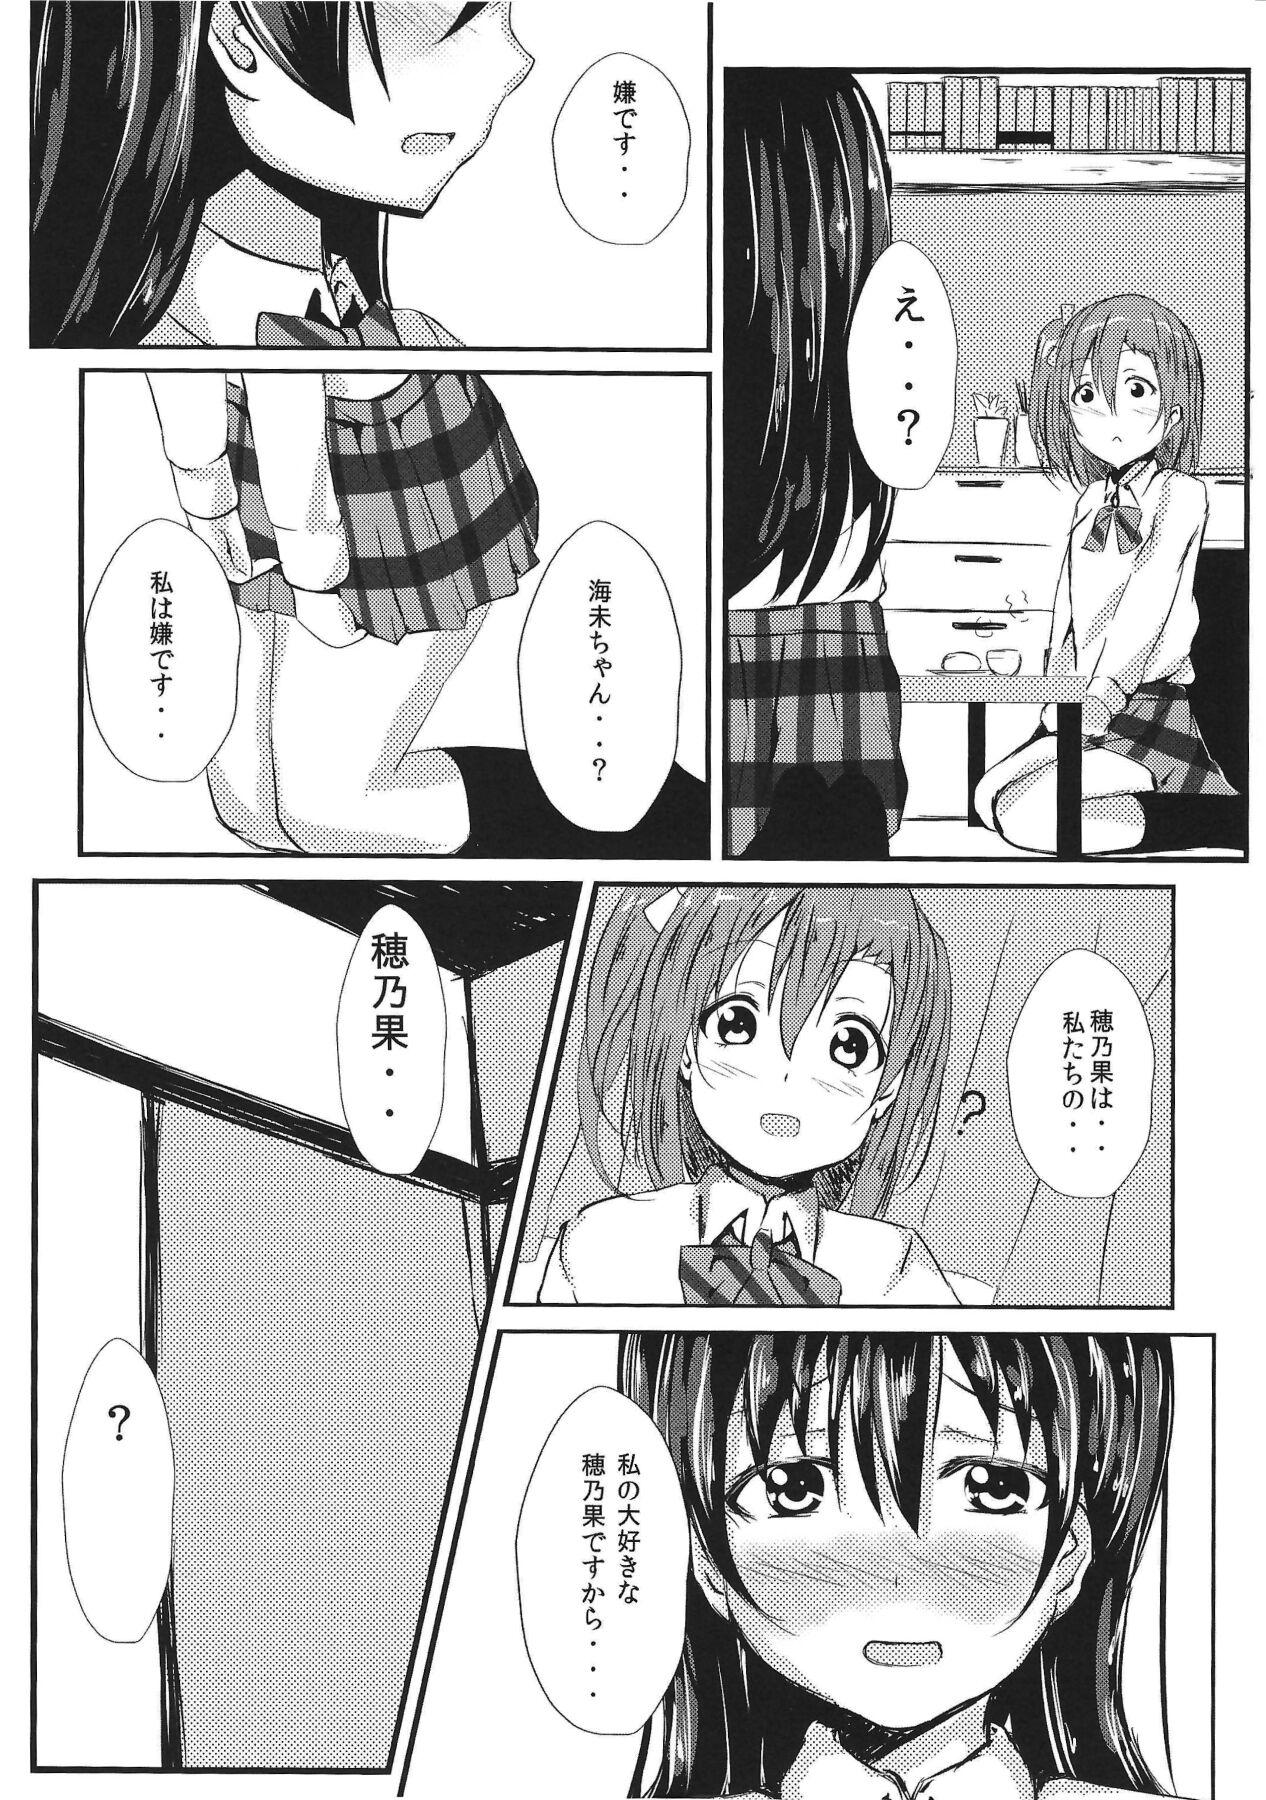 Pounded LOVE!LOVE!FESTIVAL!! 2 - Love live Clothed - Page 6